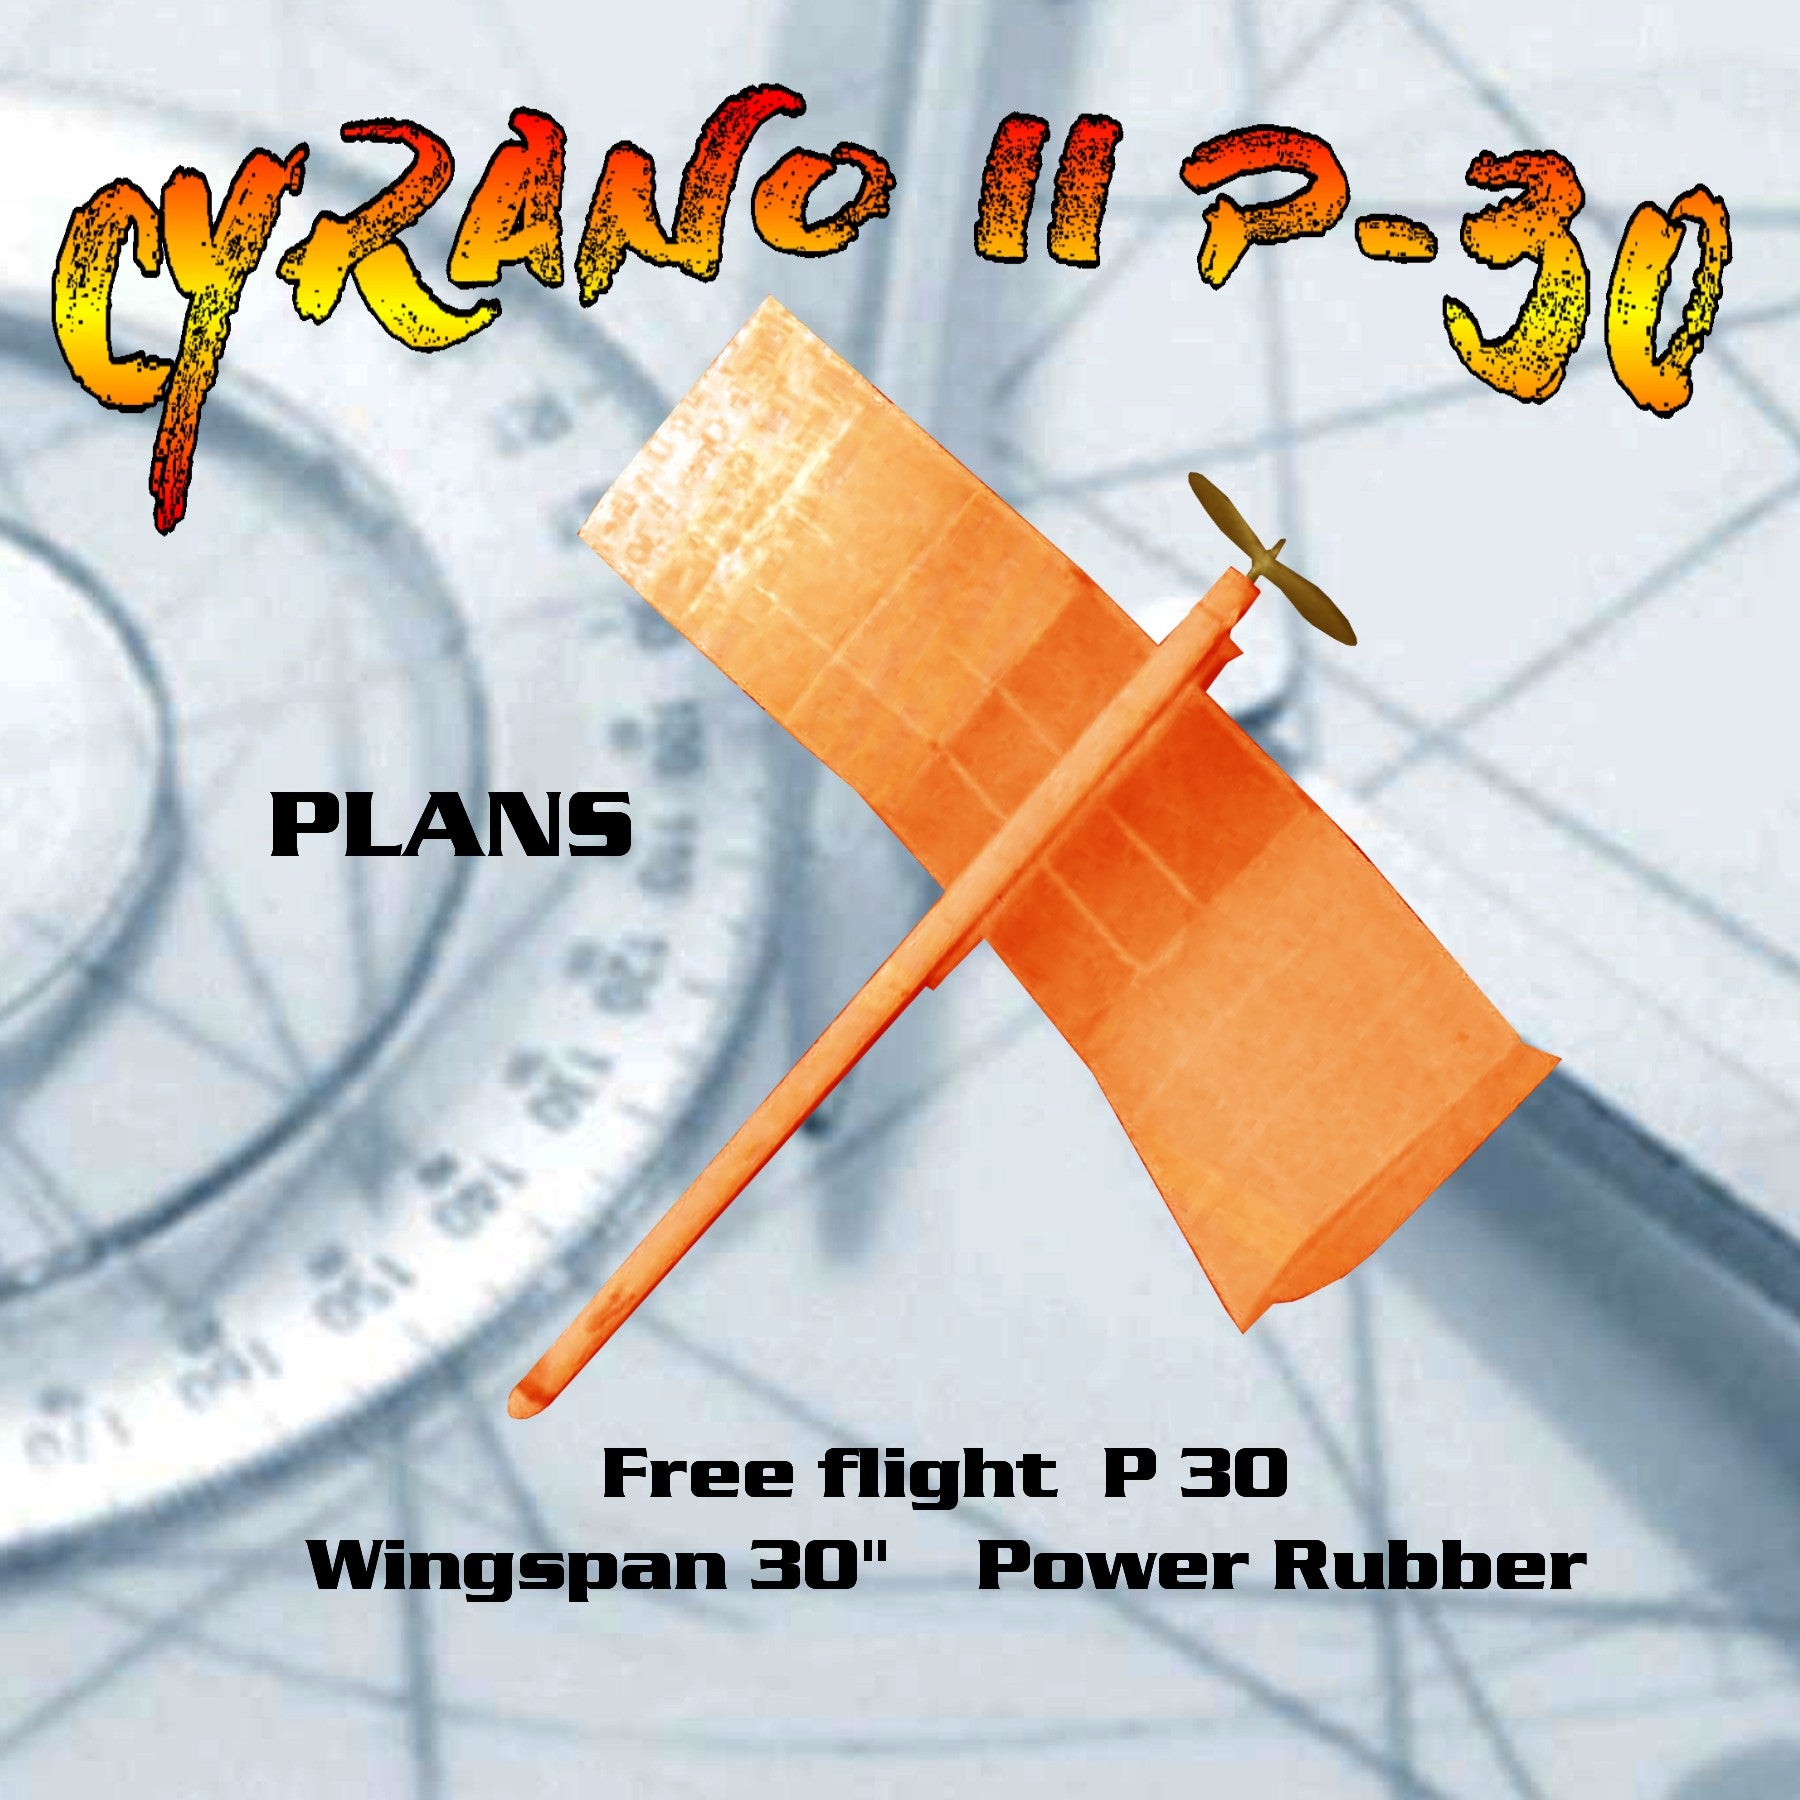 printed plan flying wing cyrano ii p-30 power rubber victorious in open p-30